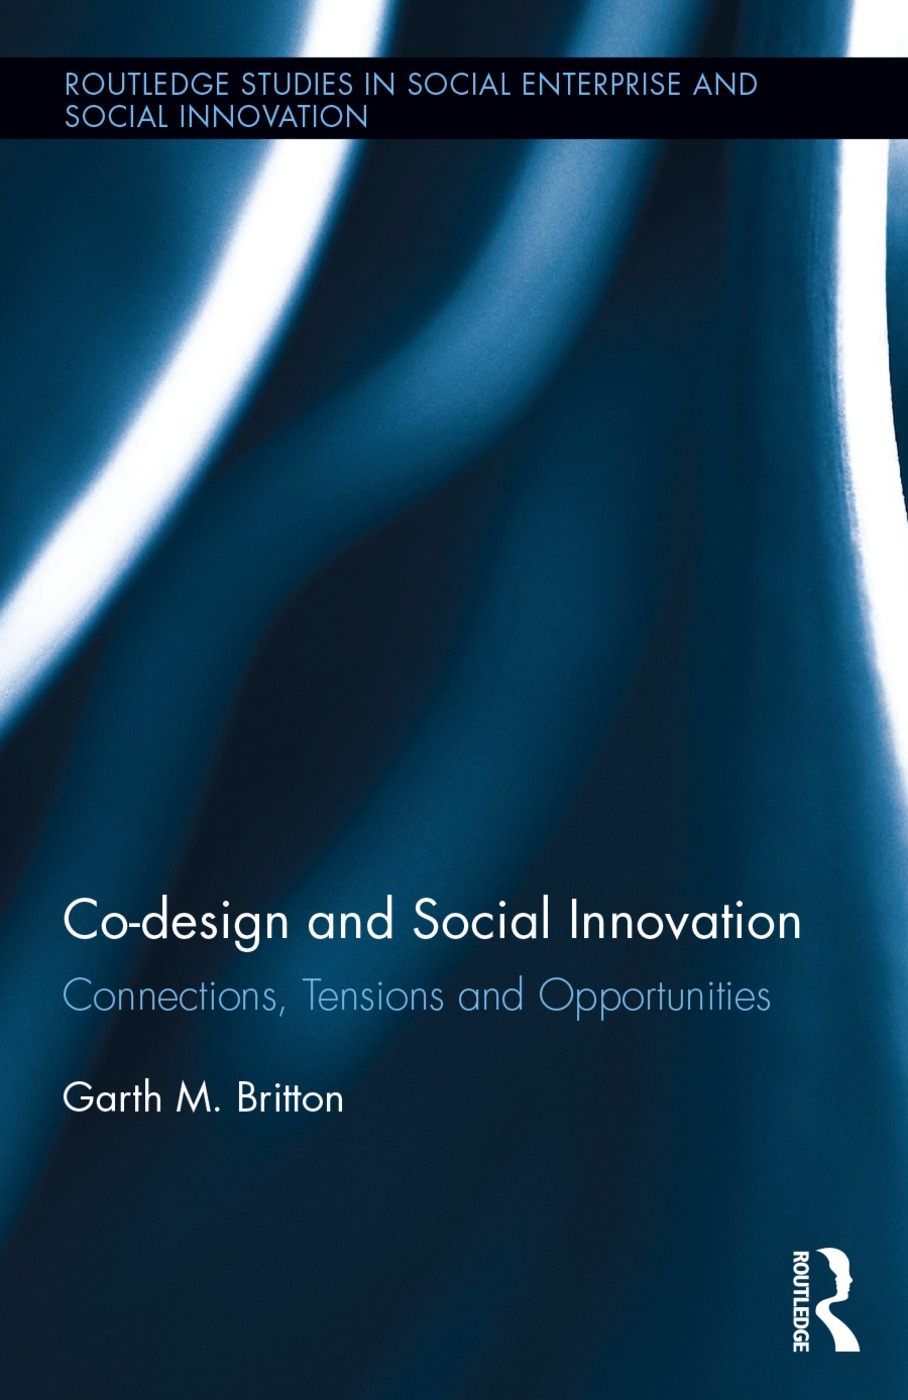 Co-Design and Social Innovation: Connections, Tensions and Opportunities